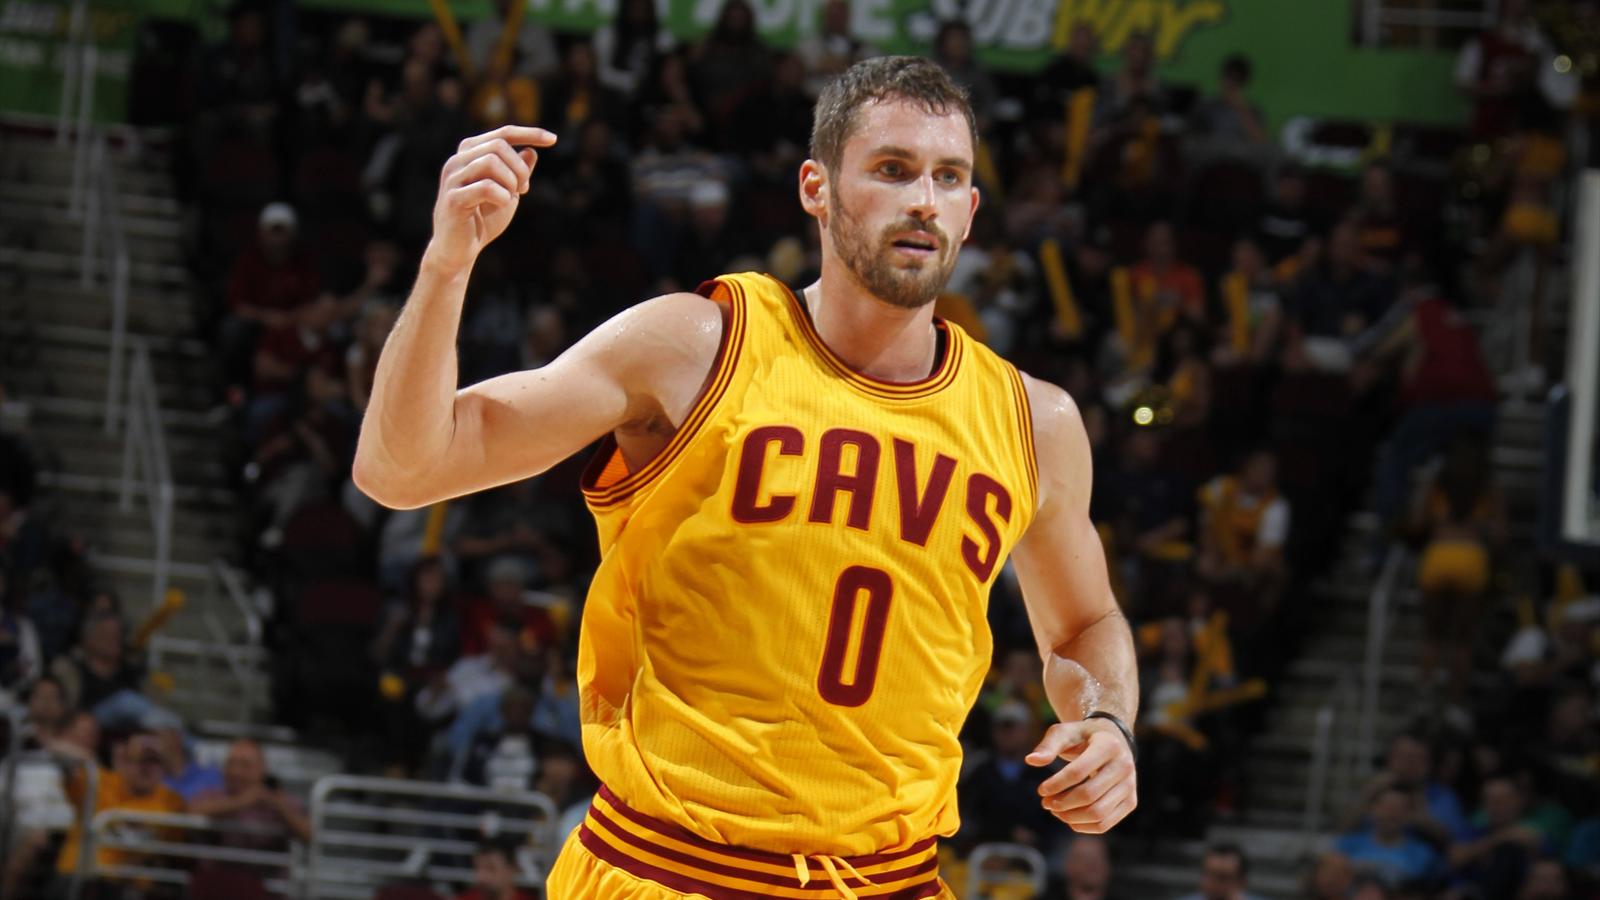 Kevin Love Wallpaper HD Collection For